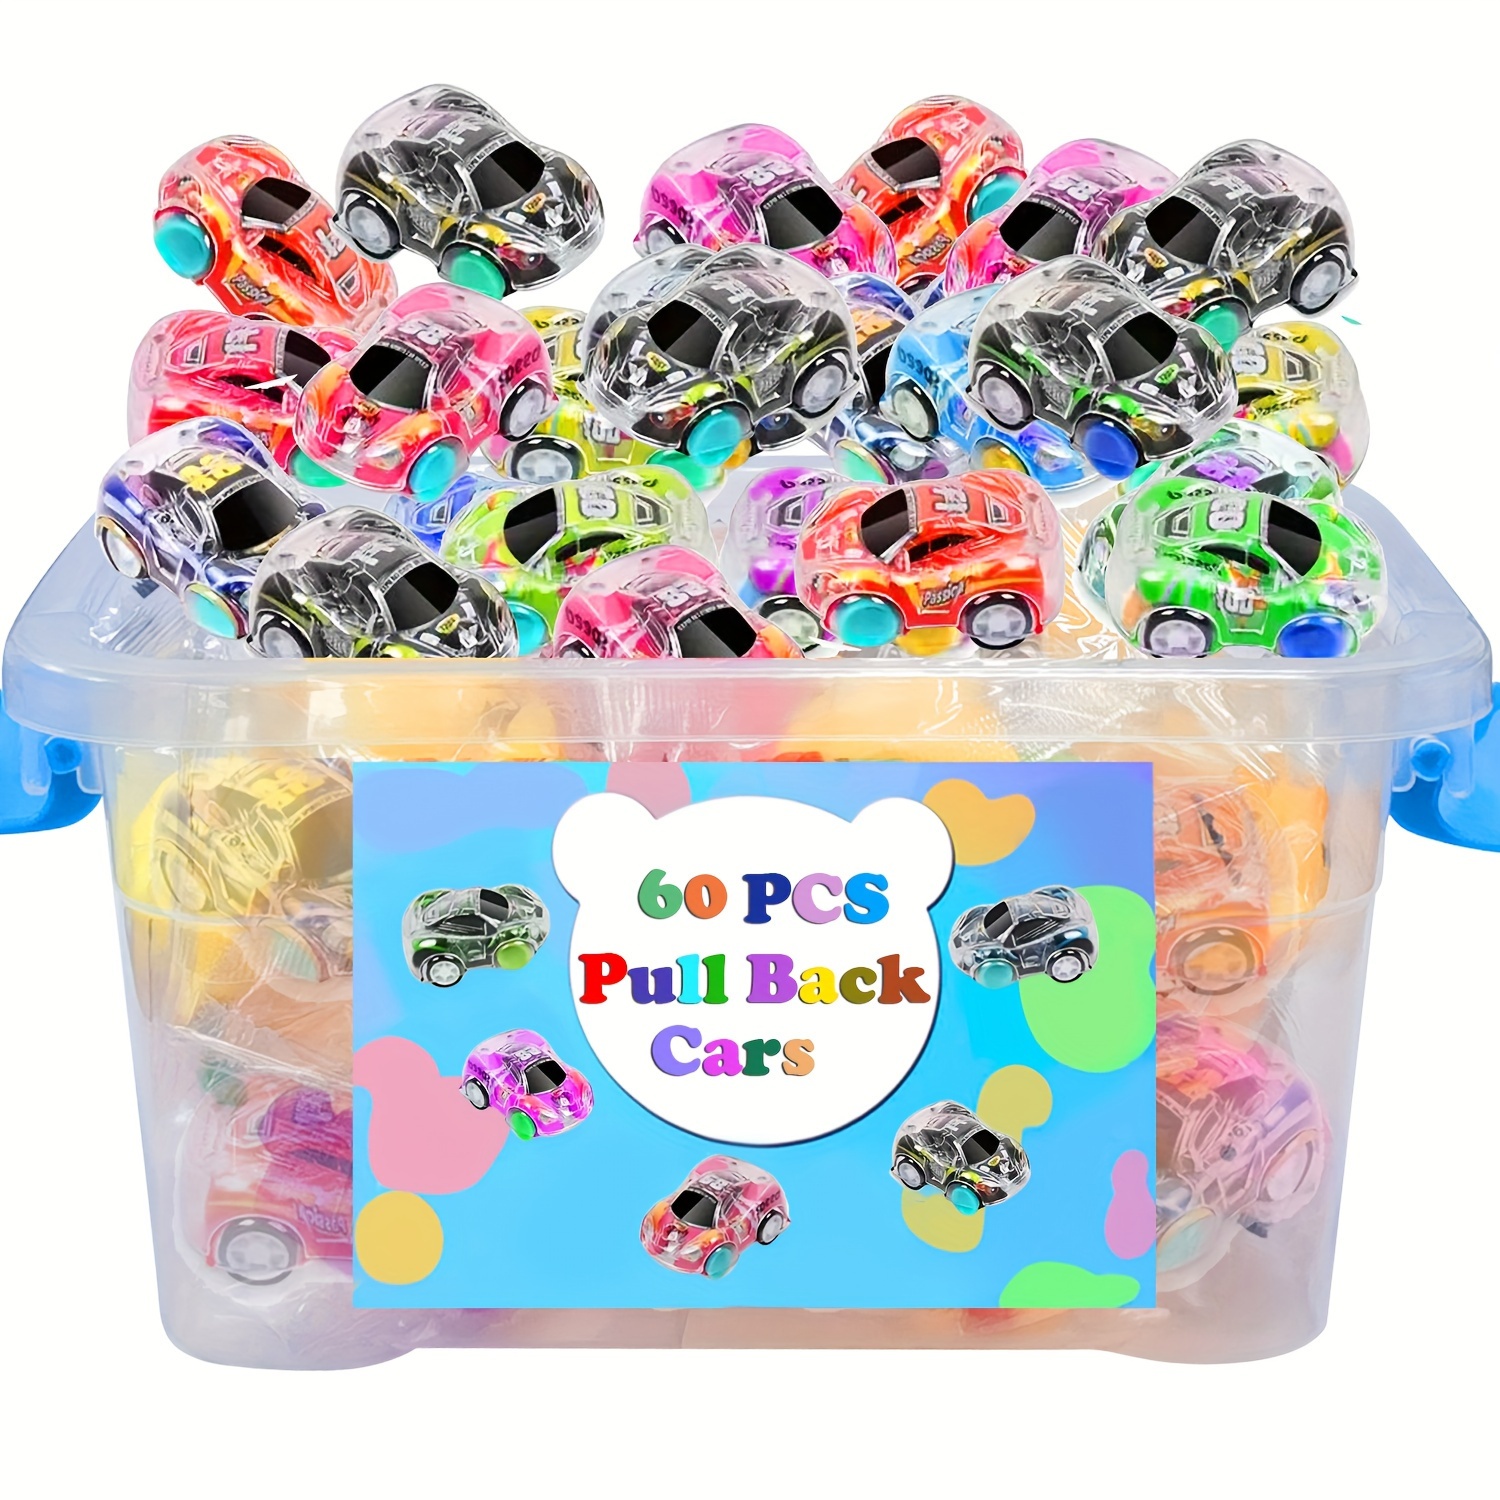 

60pcs, Mini Pull Back Cars Set With Box, Pull Back Racing Vehicles, Party Favors Treasure Box, Classroom Prizes, Pinata Fillers, Goodie Bag Stuffers For Teenagers Random Style